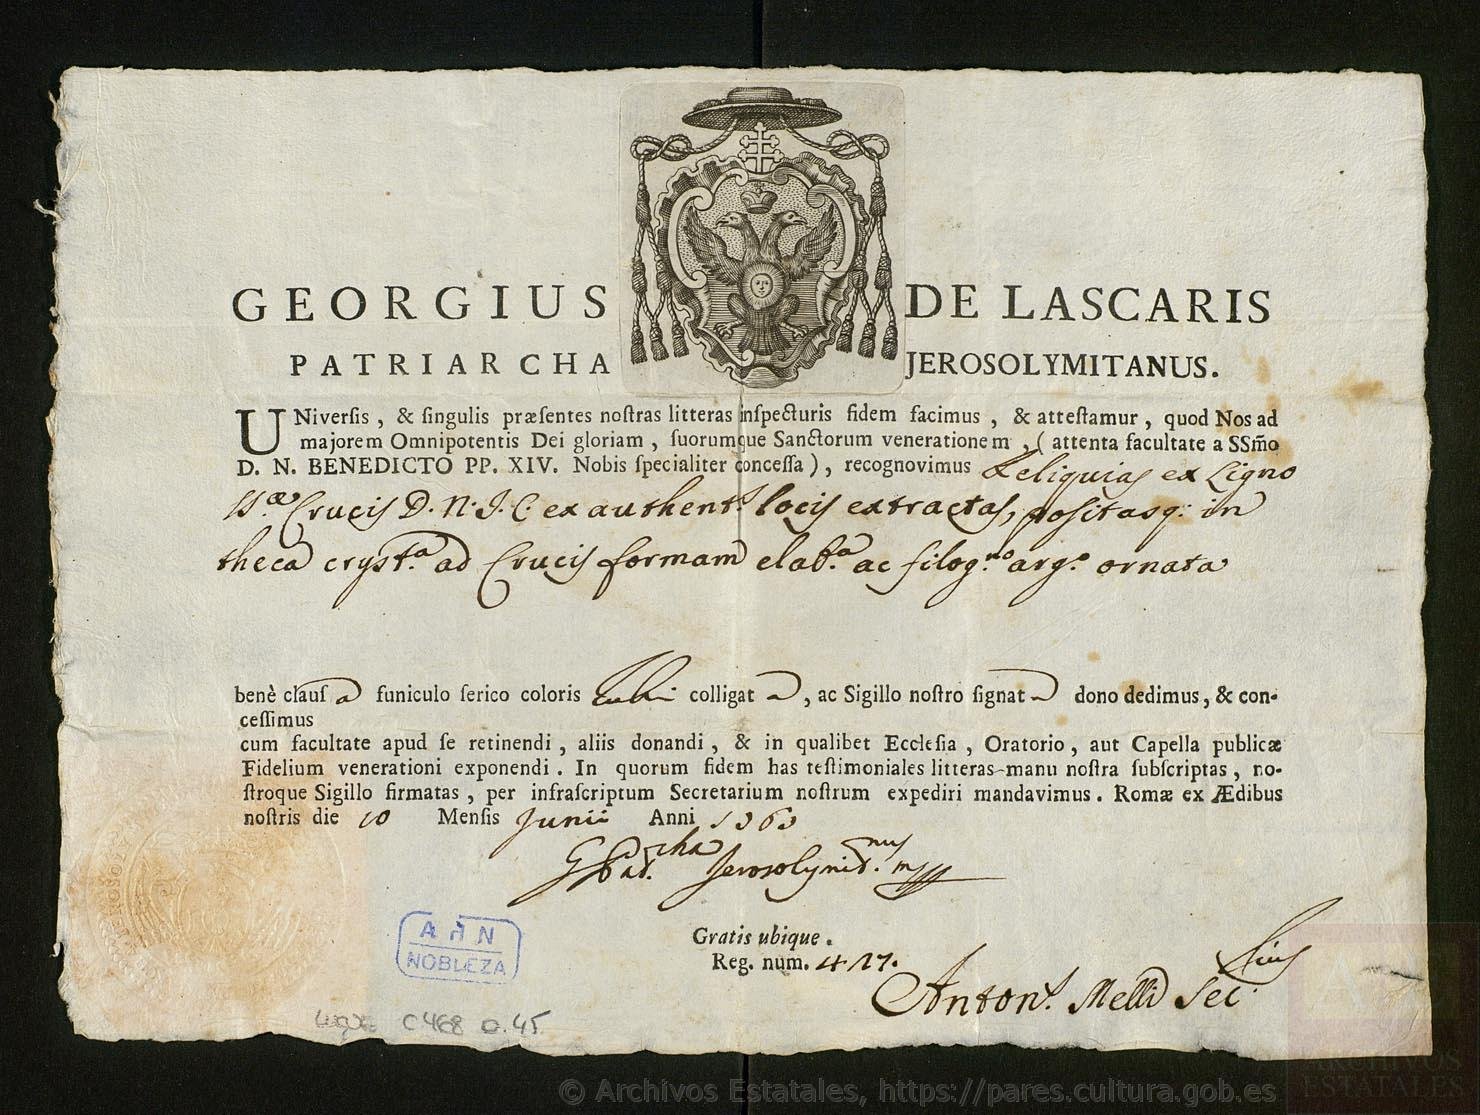 Archivo Histórico de la Nobleza, Certificates of authenticity from Rome, for various relics, avalaible here